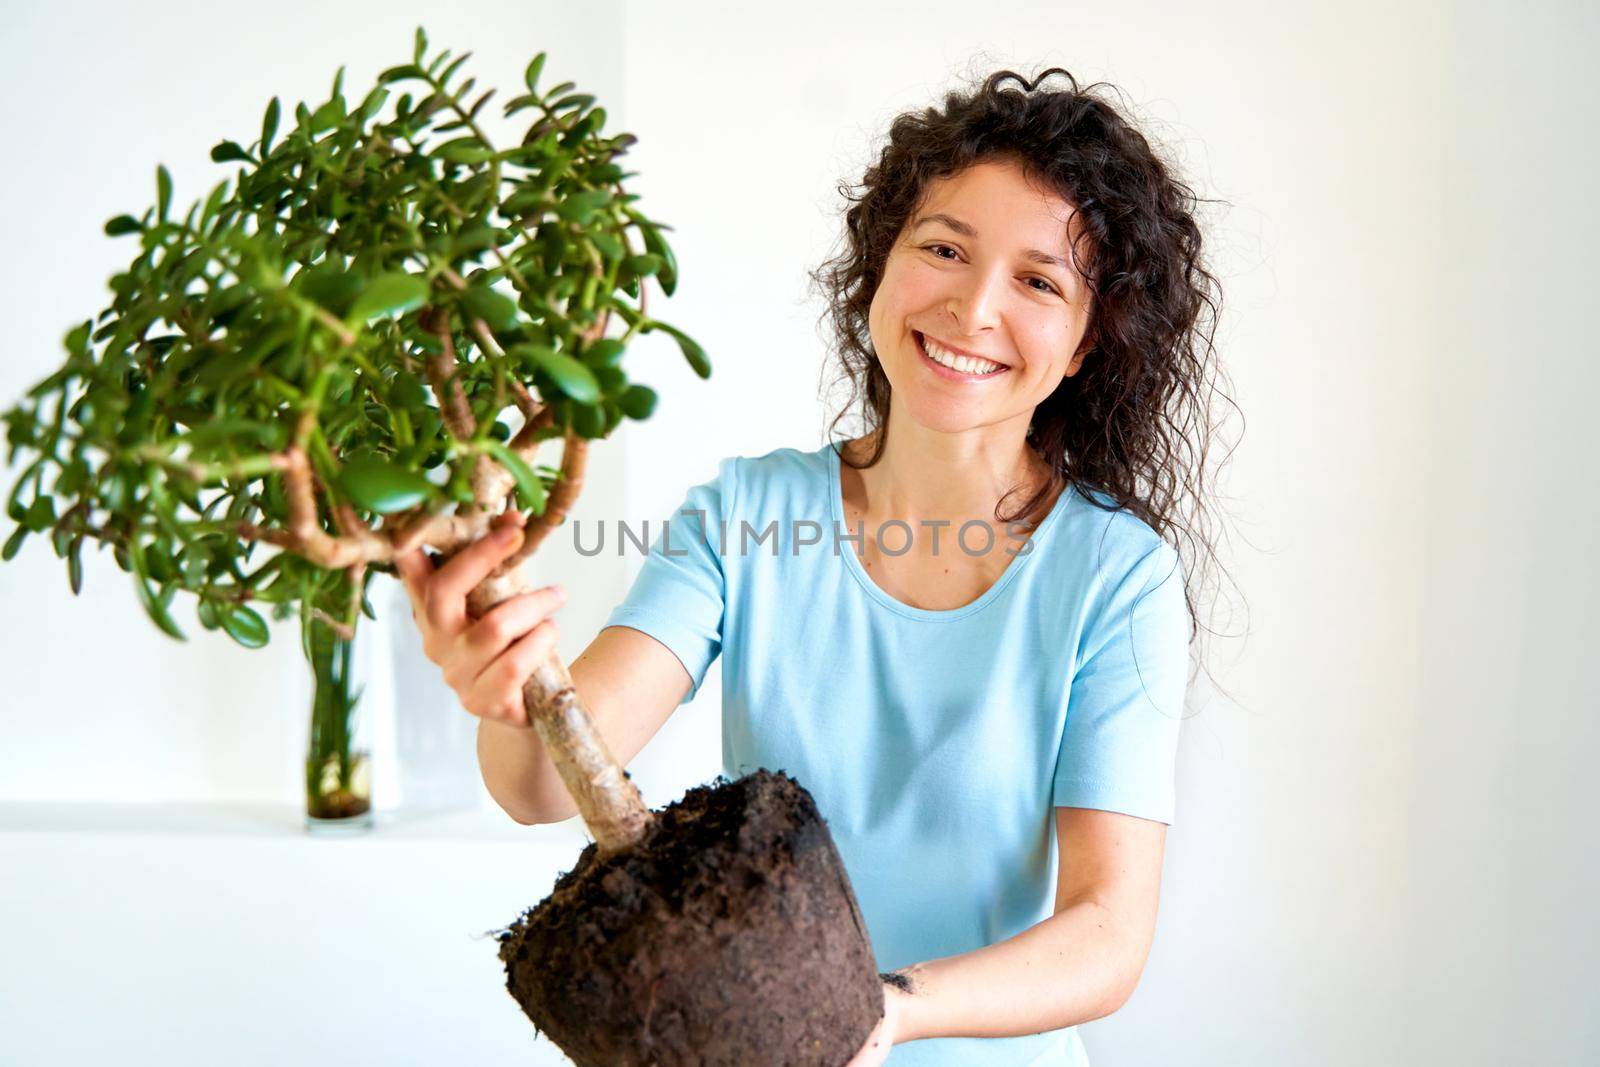 The girl is holding a large flower in her hands, which she transplants into a new pot.